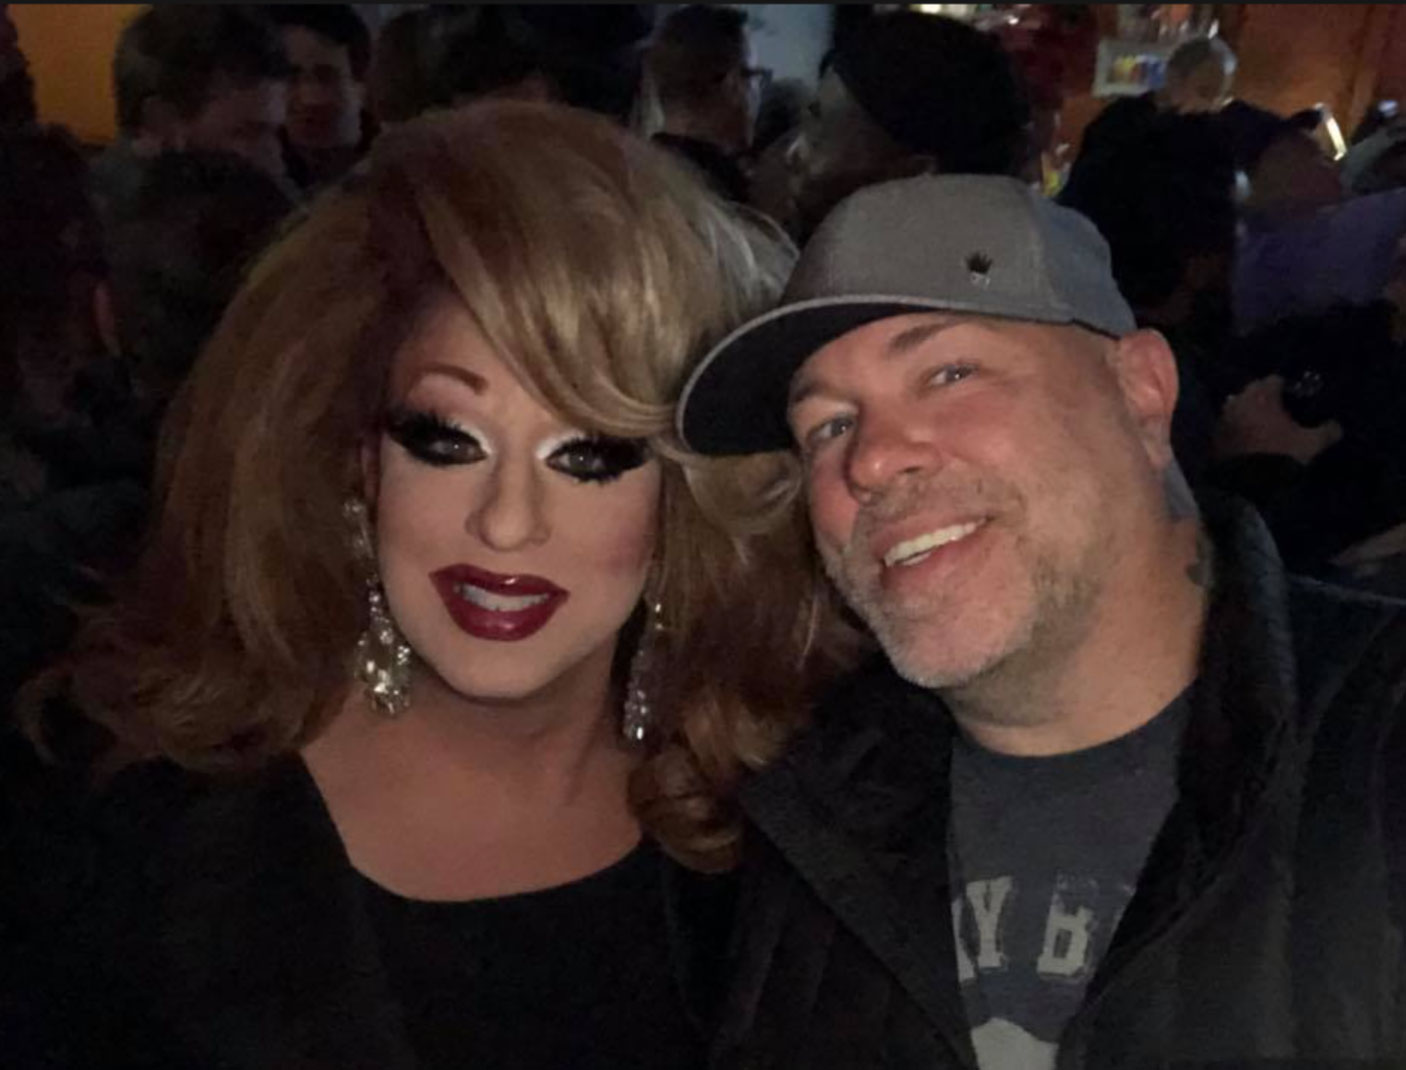 MGAZINE: PRESS RELEASE: Hamburger Mary&#39;s Returns to St. Louis, Opens in New Location January 20